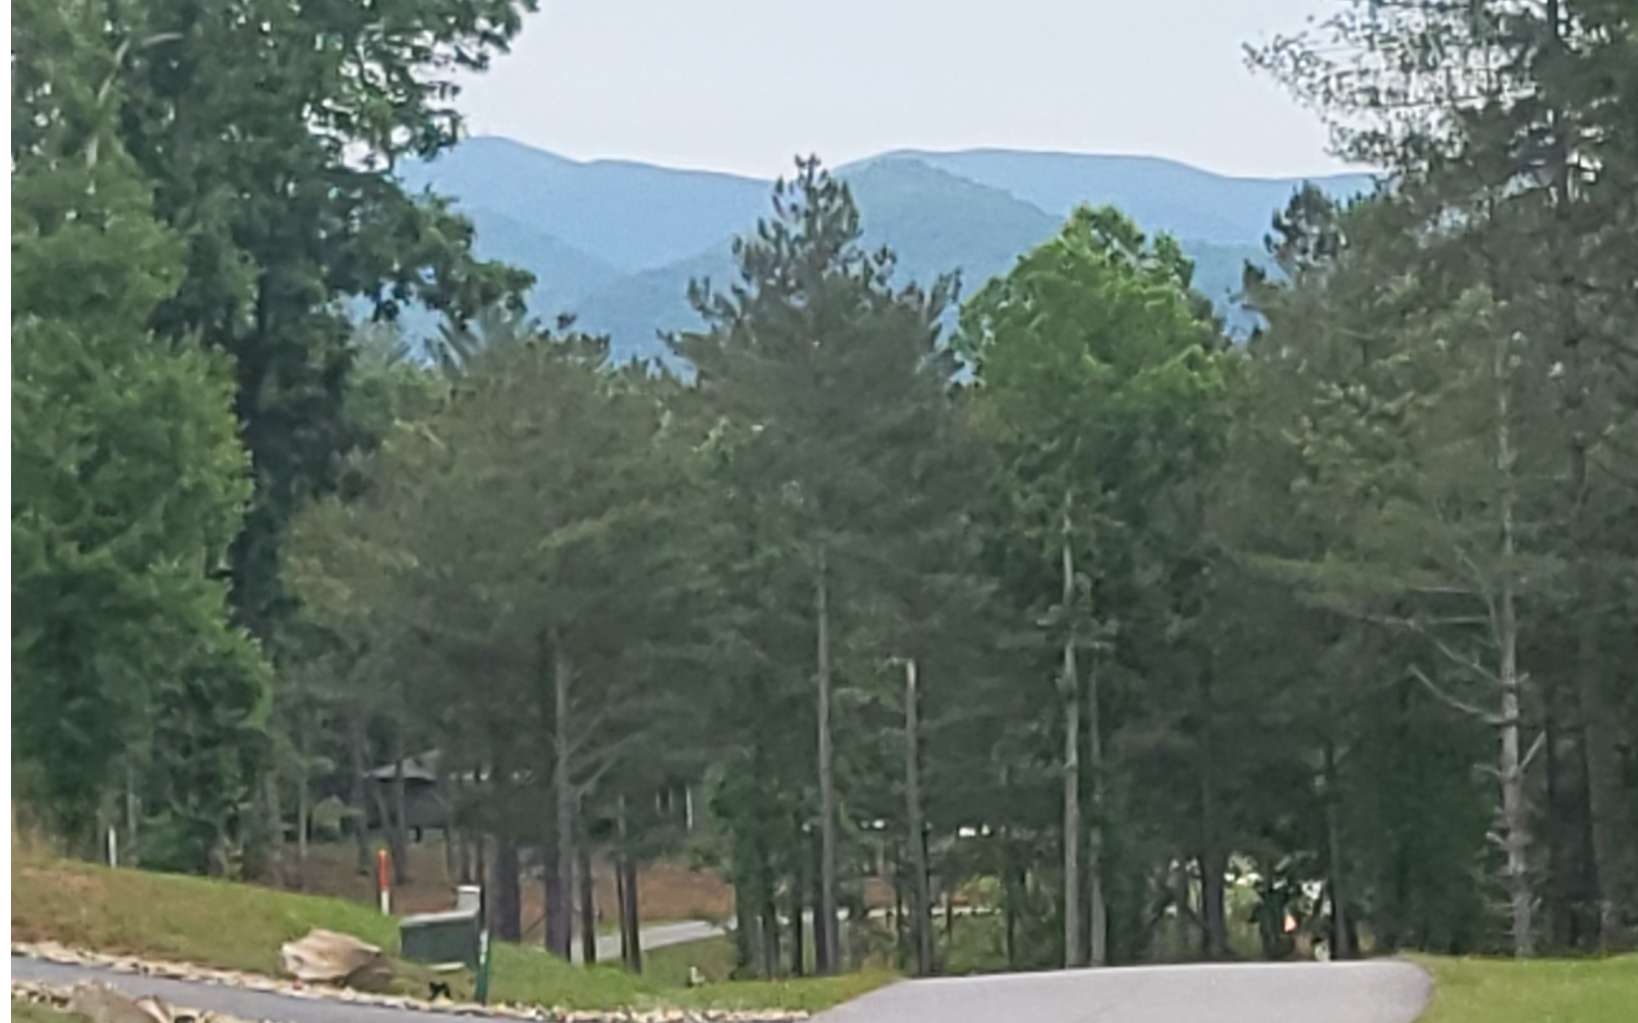 MOUNTAIN AND LAKE DREAMS COME TRUE FOR SUCH A REASONABLE PRICE!!!! Extremely easy build lot in a desirable neighborhood with a gorgeous Lake Nottely Access Clubhouse, paved roads, public water, gated entrance, and underground power. HOA fees only $1000 year. This 1.43 gentle acre is high enough to get great views without the steepness. Wooded lot with underbrush cleared so just remove where you want to build and keep a private and shaded estate. Soil work done, just needs septic permit for your house design. Less than 5 miles to Ingles and 3 miles to Walmart.